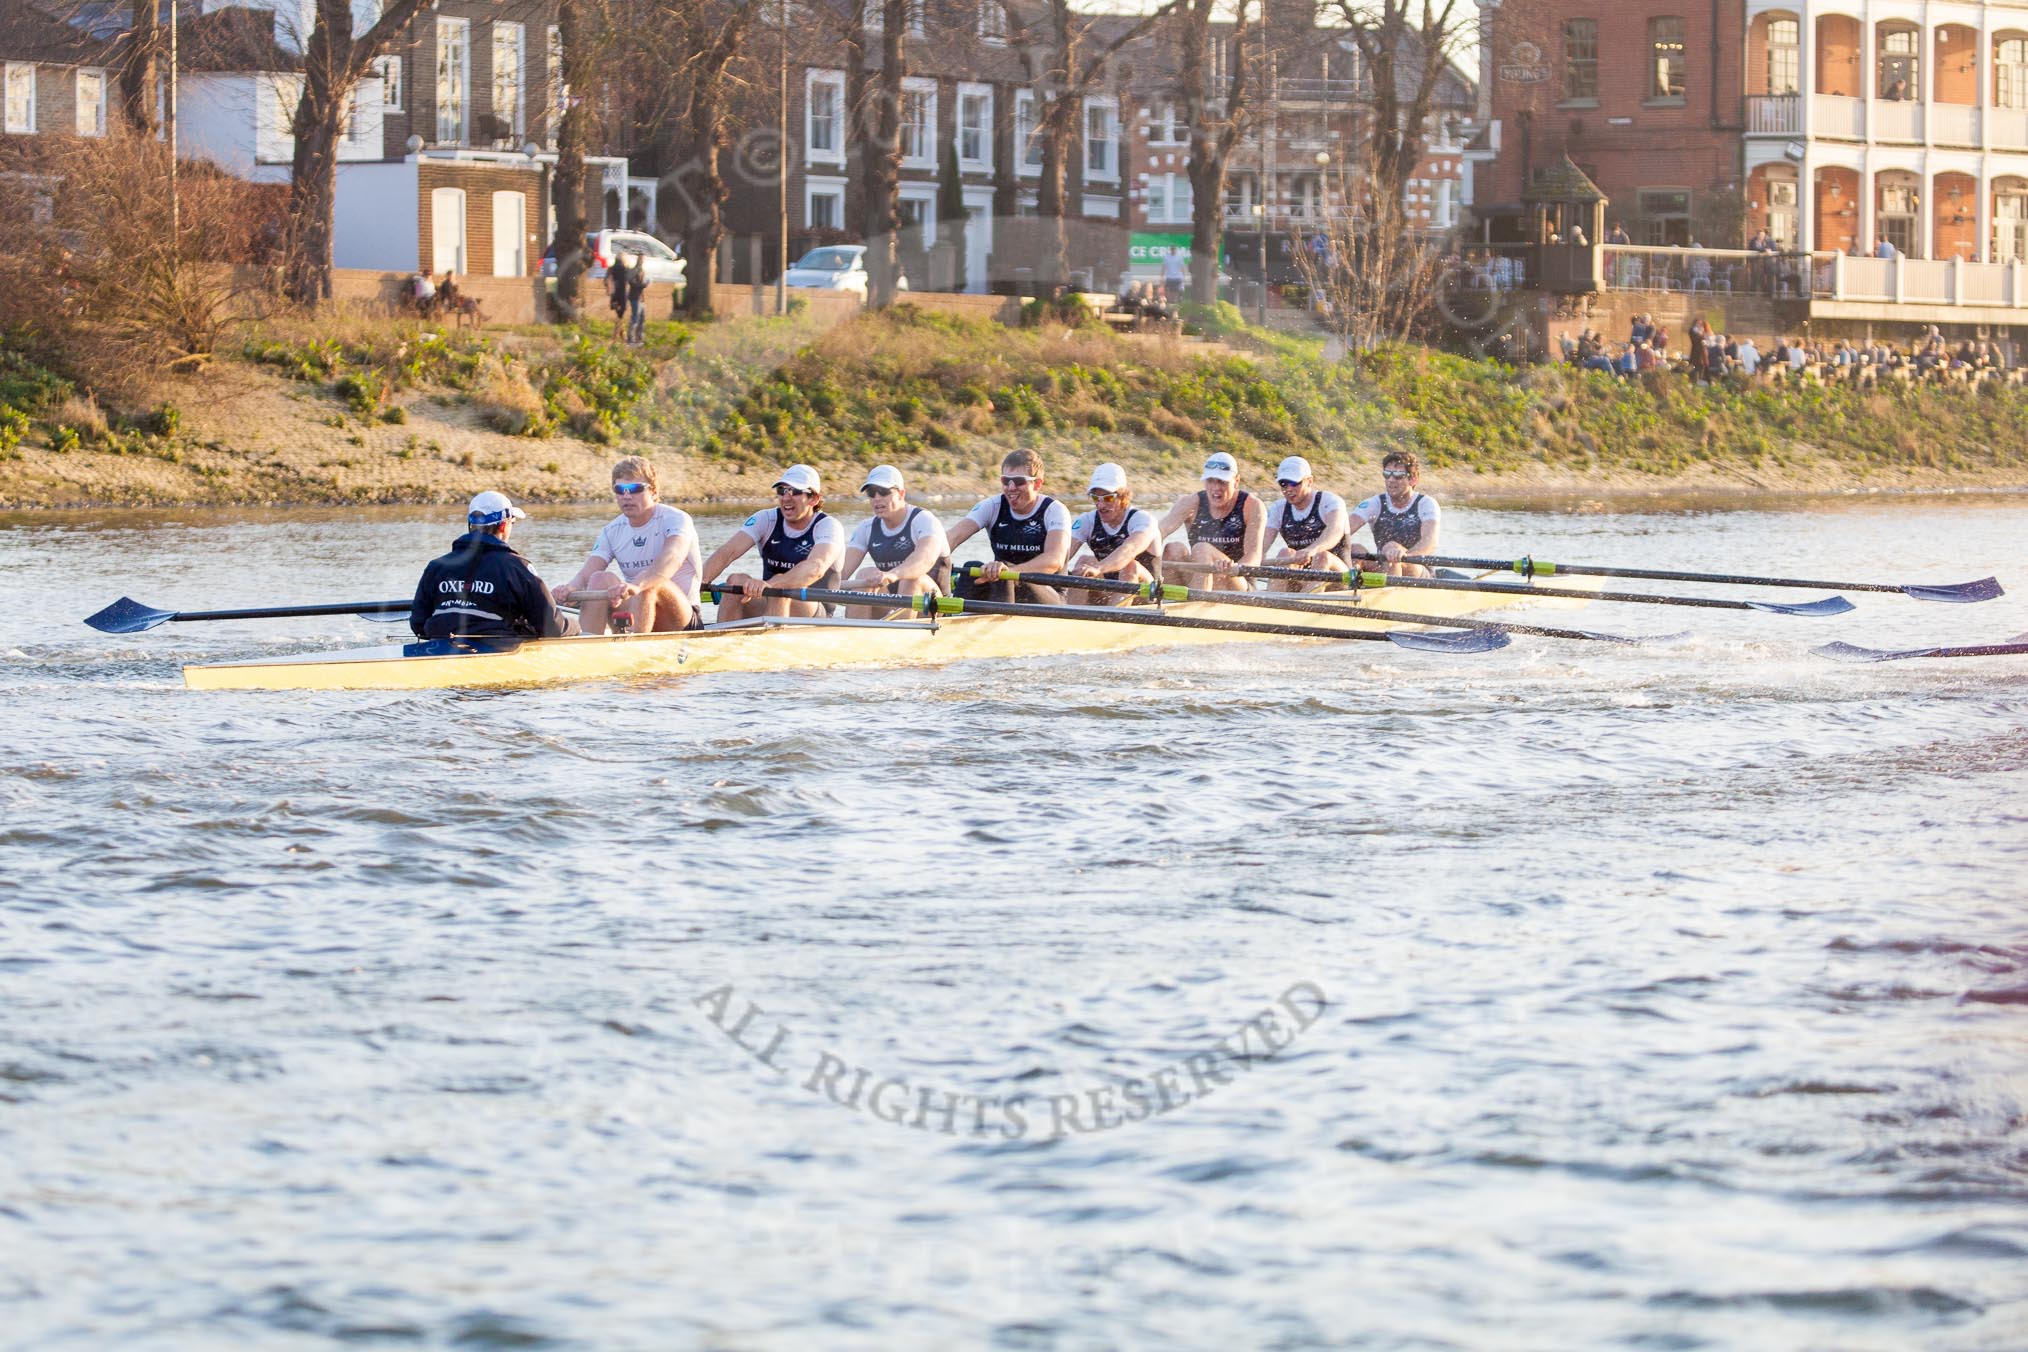 The Boat Race season 2014 - fixture OUBC vs German U23: The OUBC boat during the second race between Barnes Railway Bridge and the finish line at Chiswick Bridge..
River Thames between Putney Bridge and Chiswick Bridge,



on 08 March 2014 at 17:08, image #241